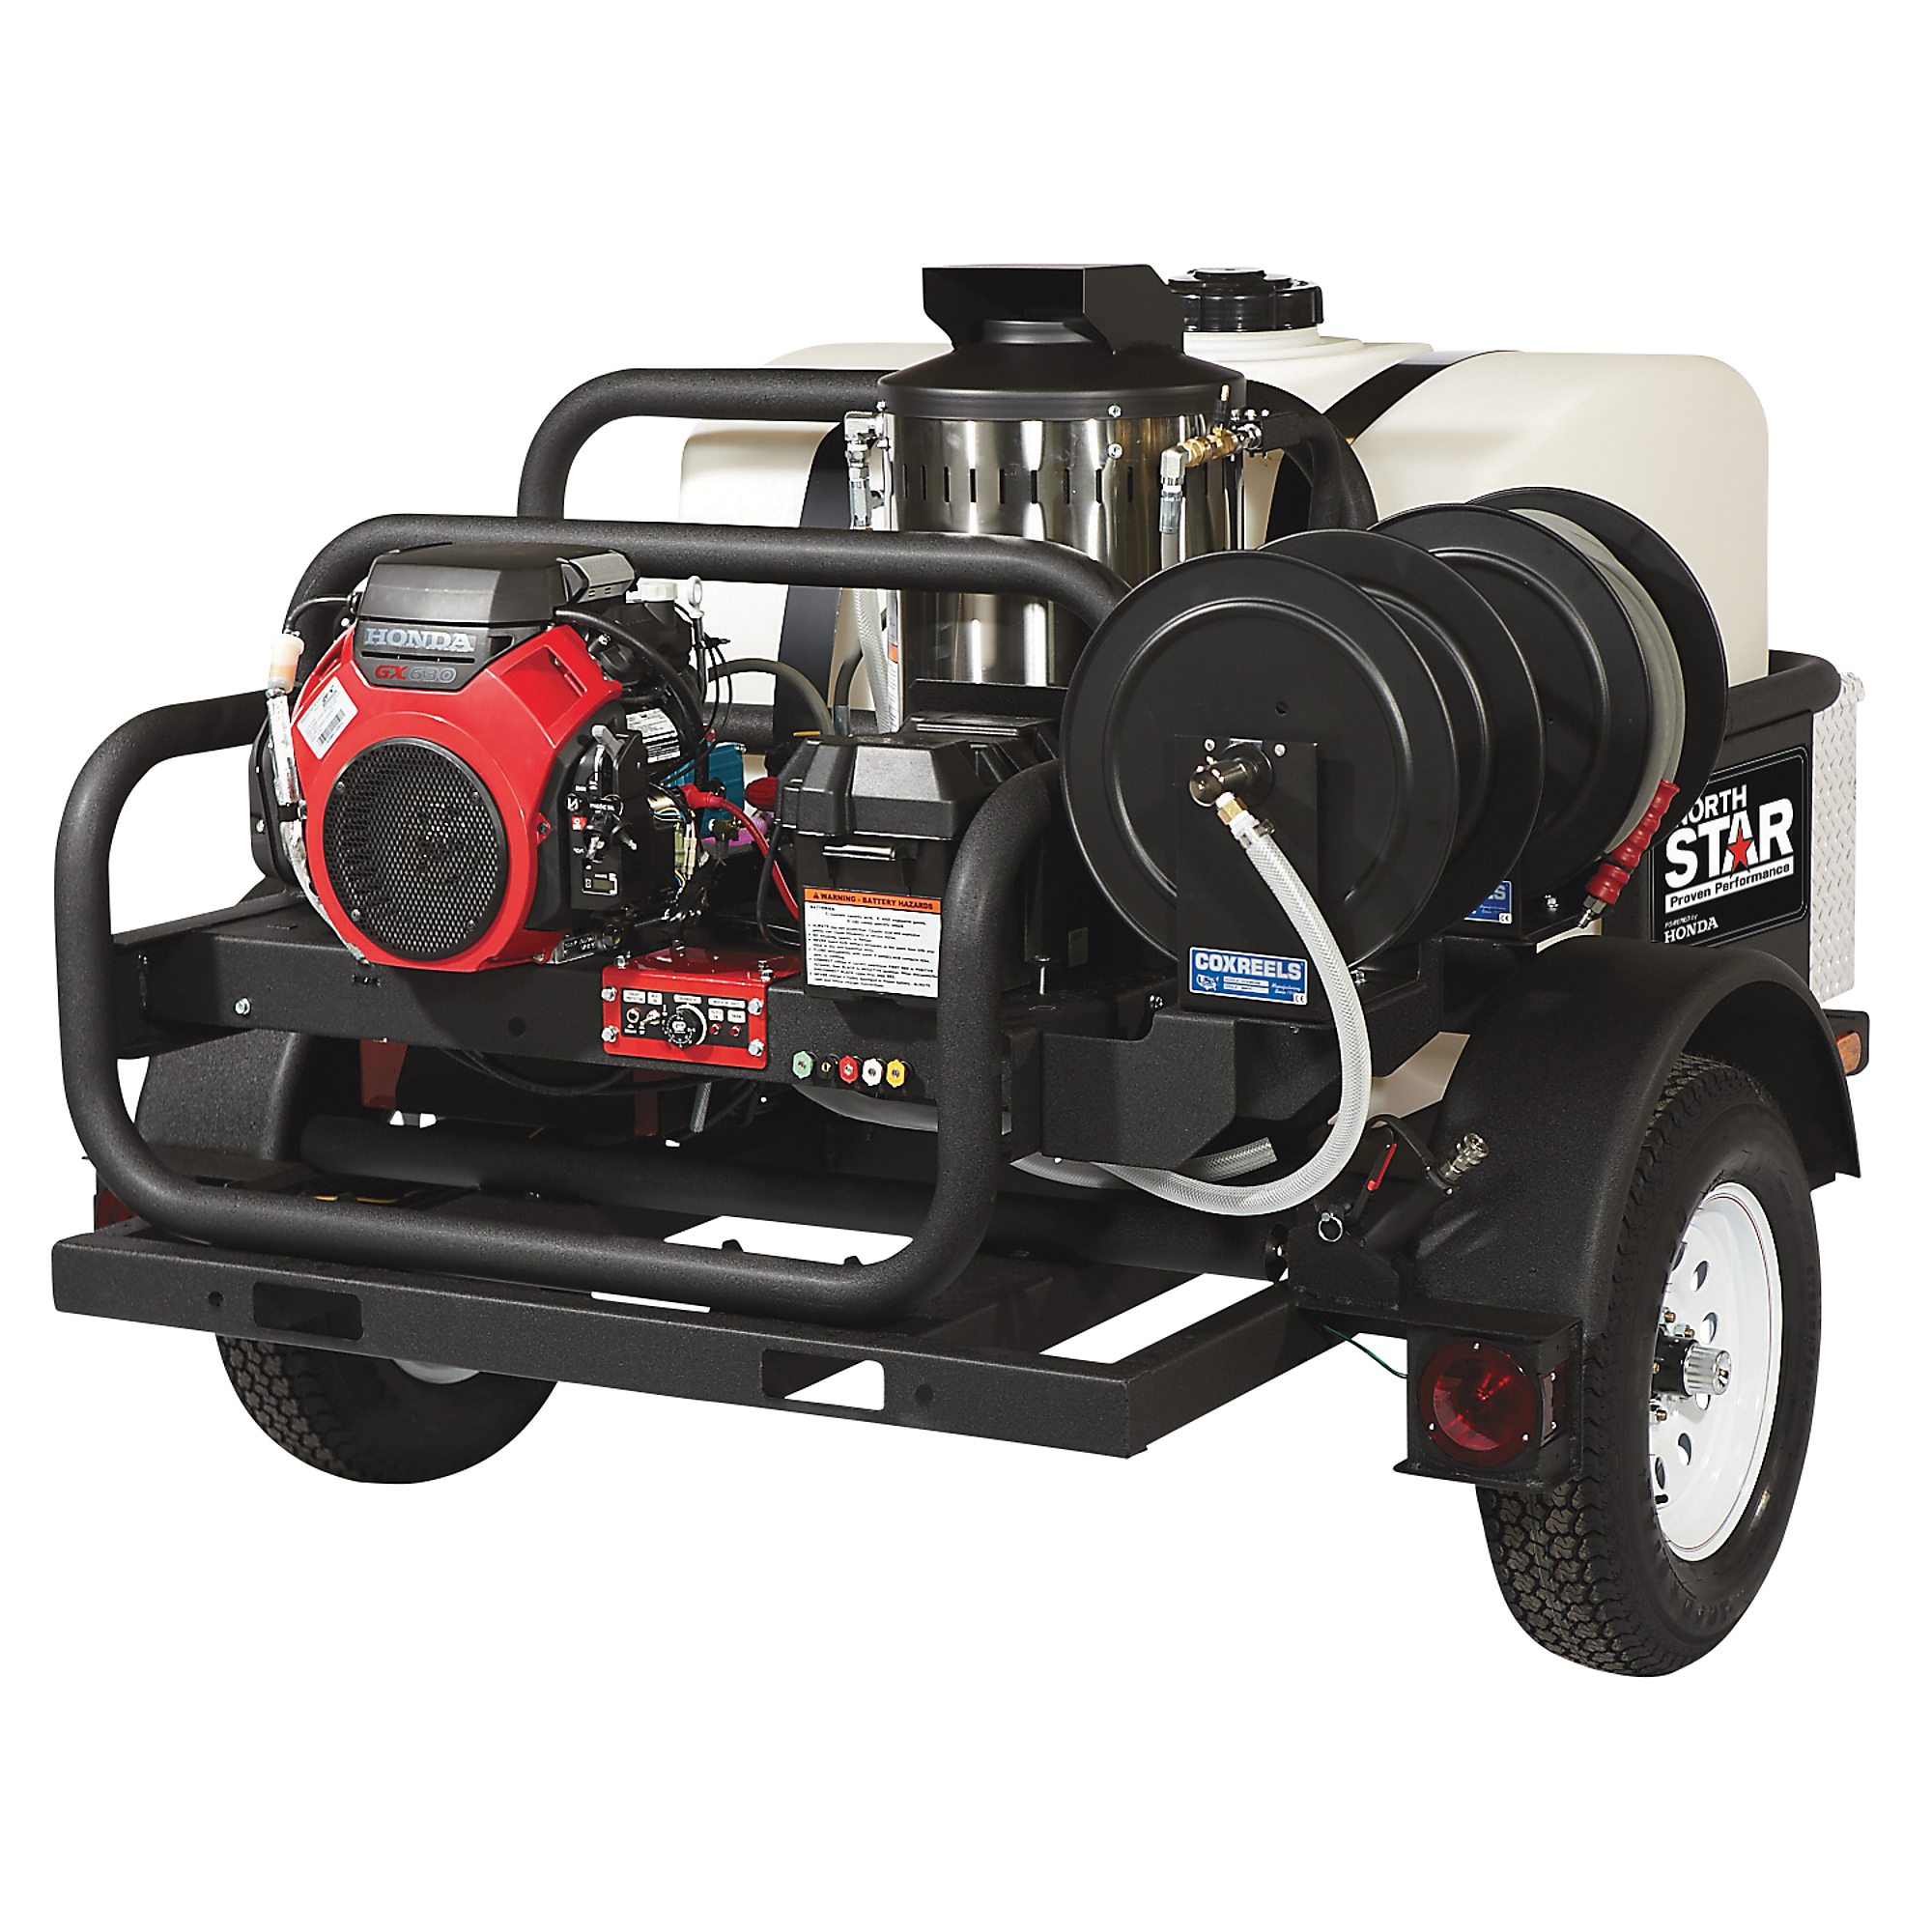 NorthStar 4000 PSI, 4.0 GPM Trailer-Mounted Hot Water Commercial Pressure Washer â Honda Engine, 200-Gal. Water Tank